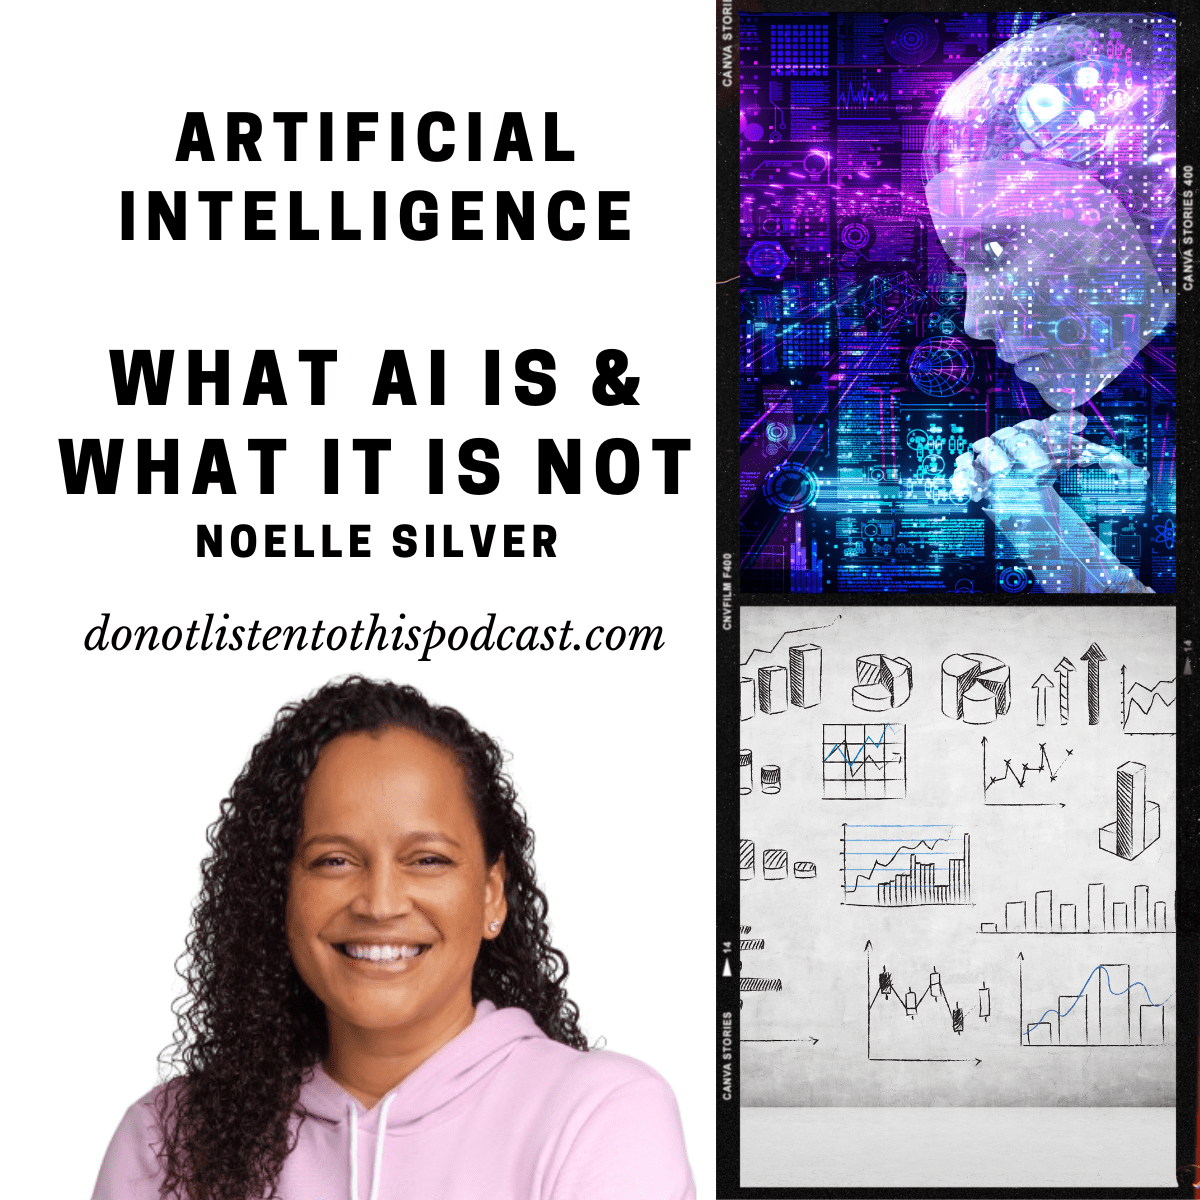 Noelle Silver joins me to chat about what Artificial Intelligence is and is not post thumbnail image